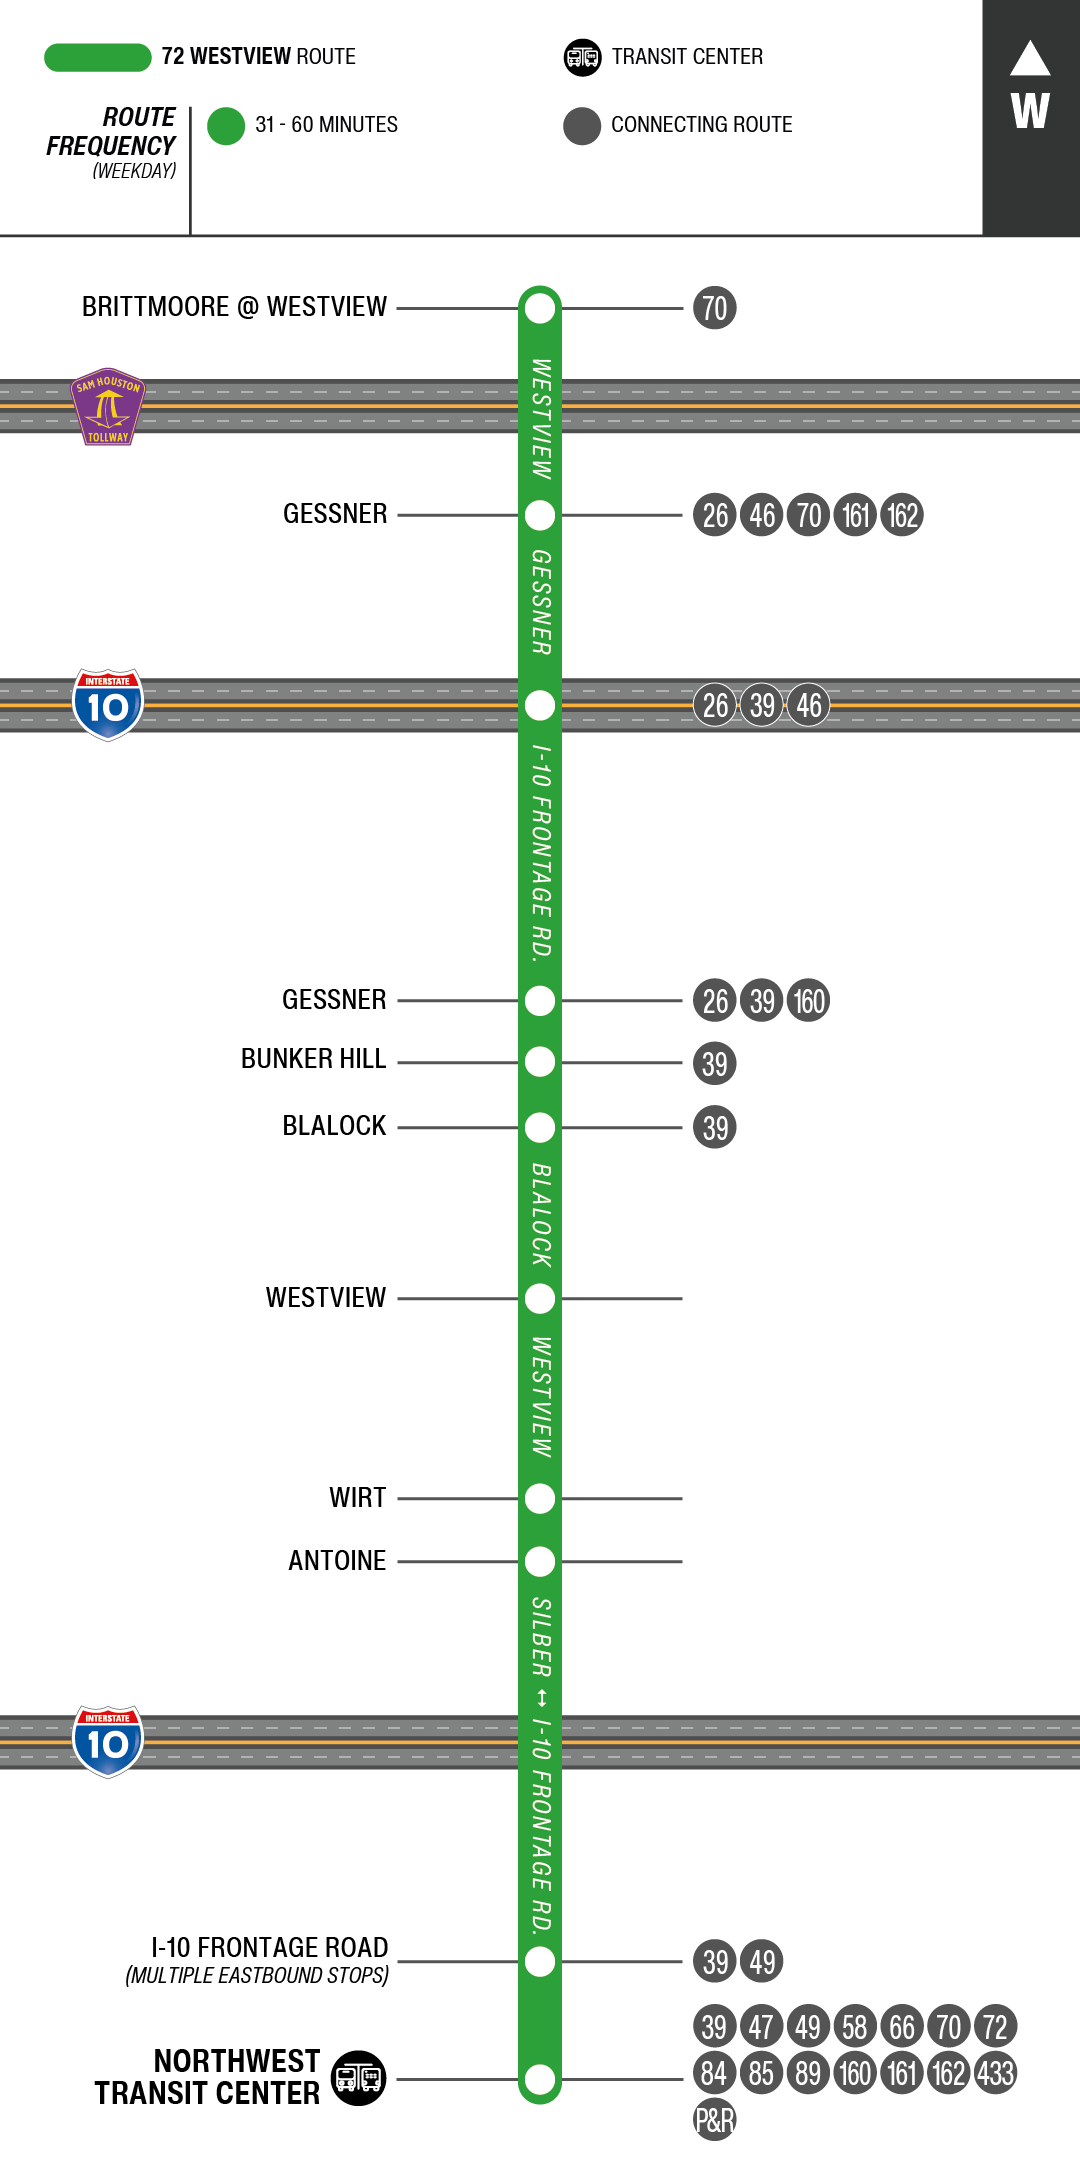 Route map for 72 Westview bus